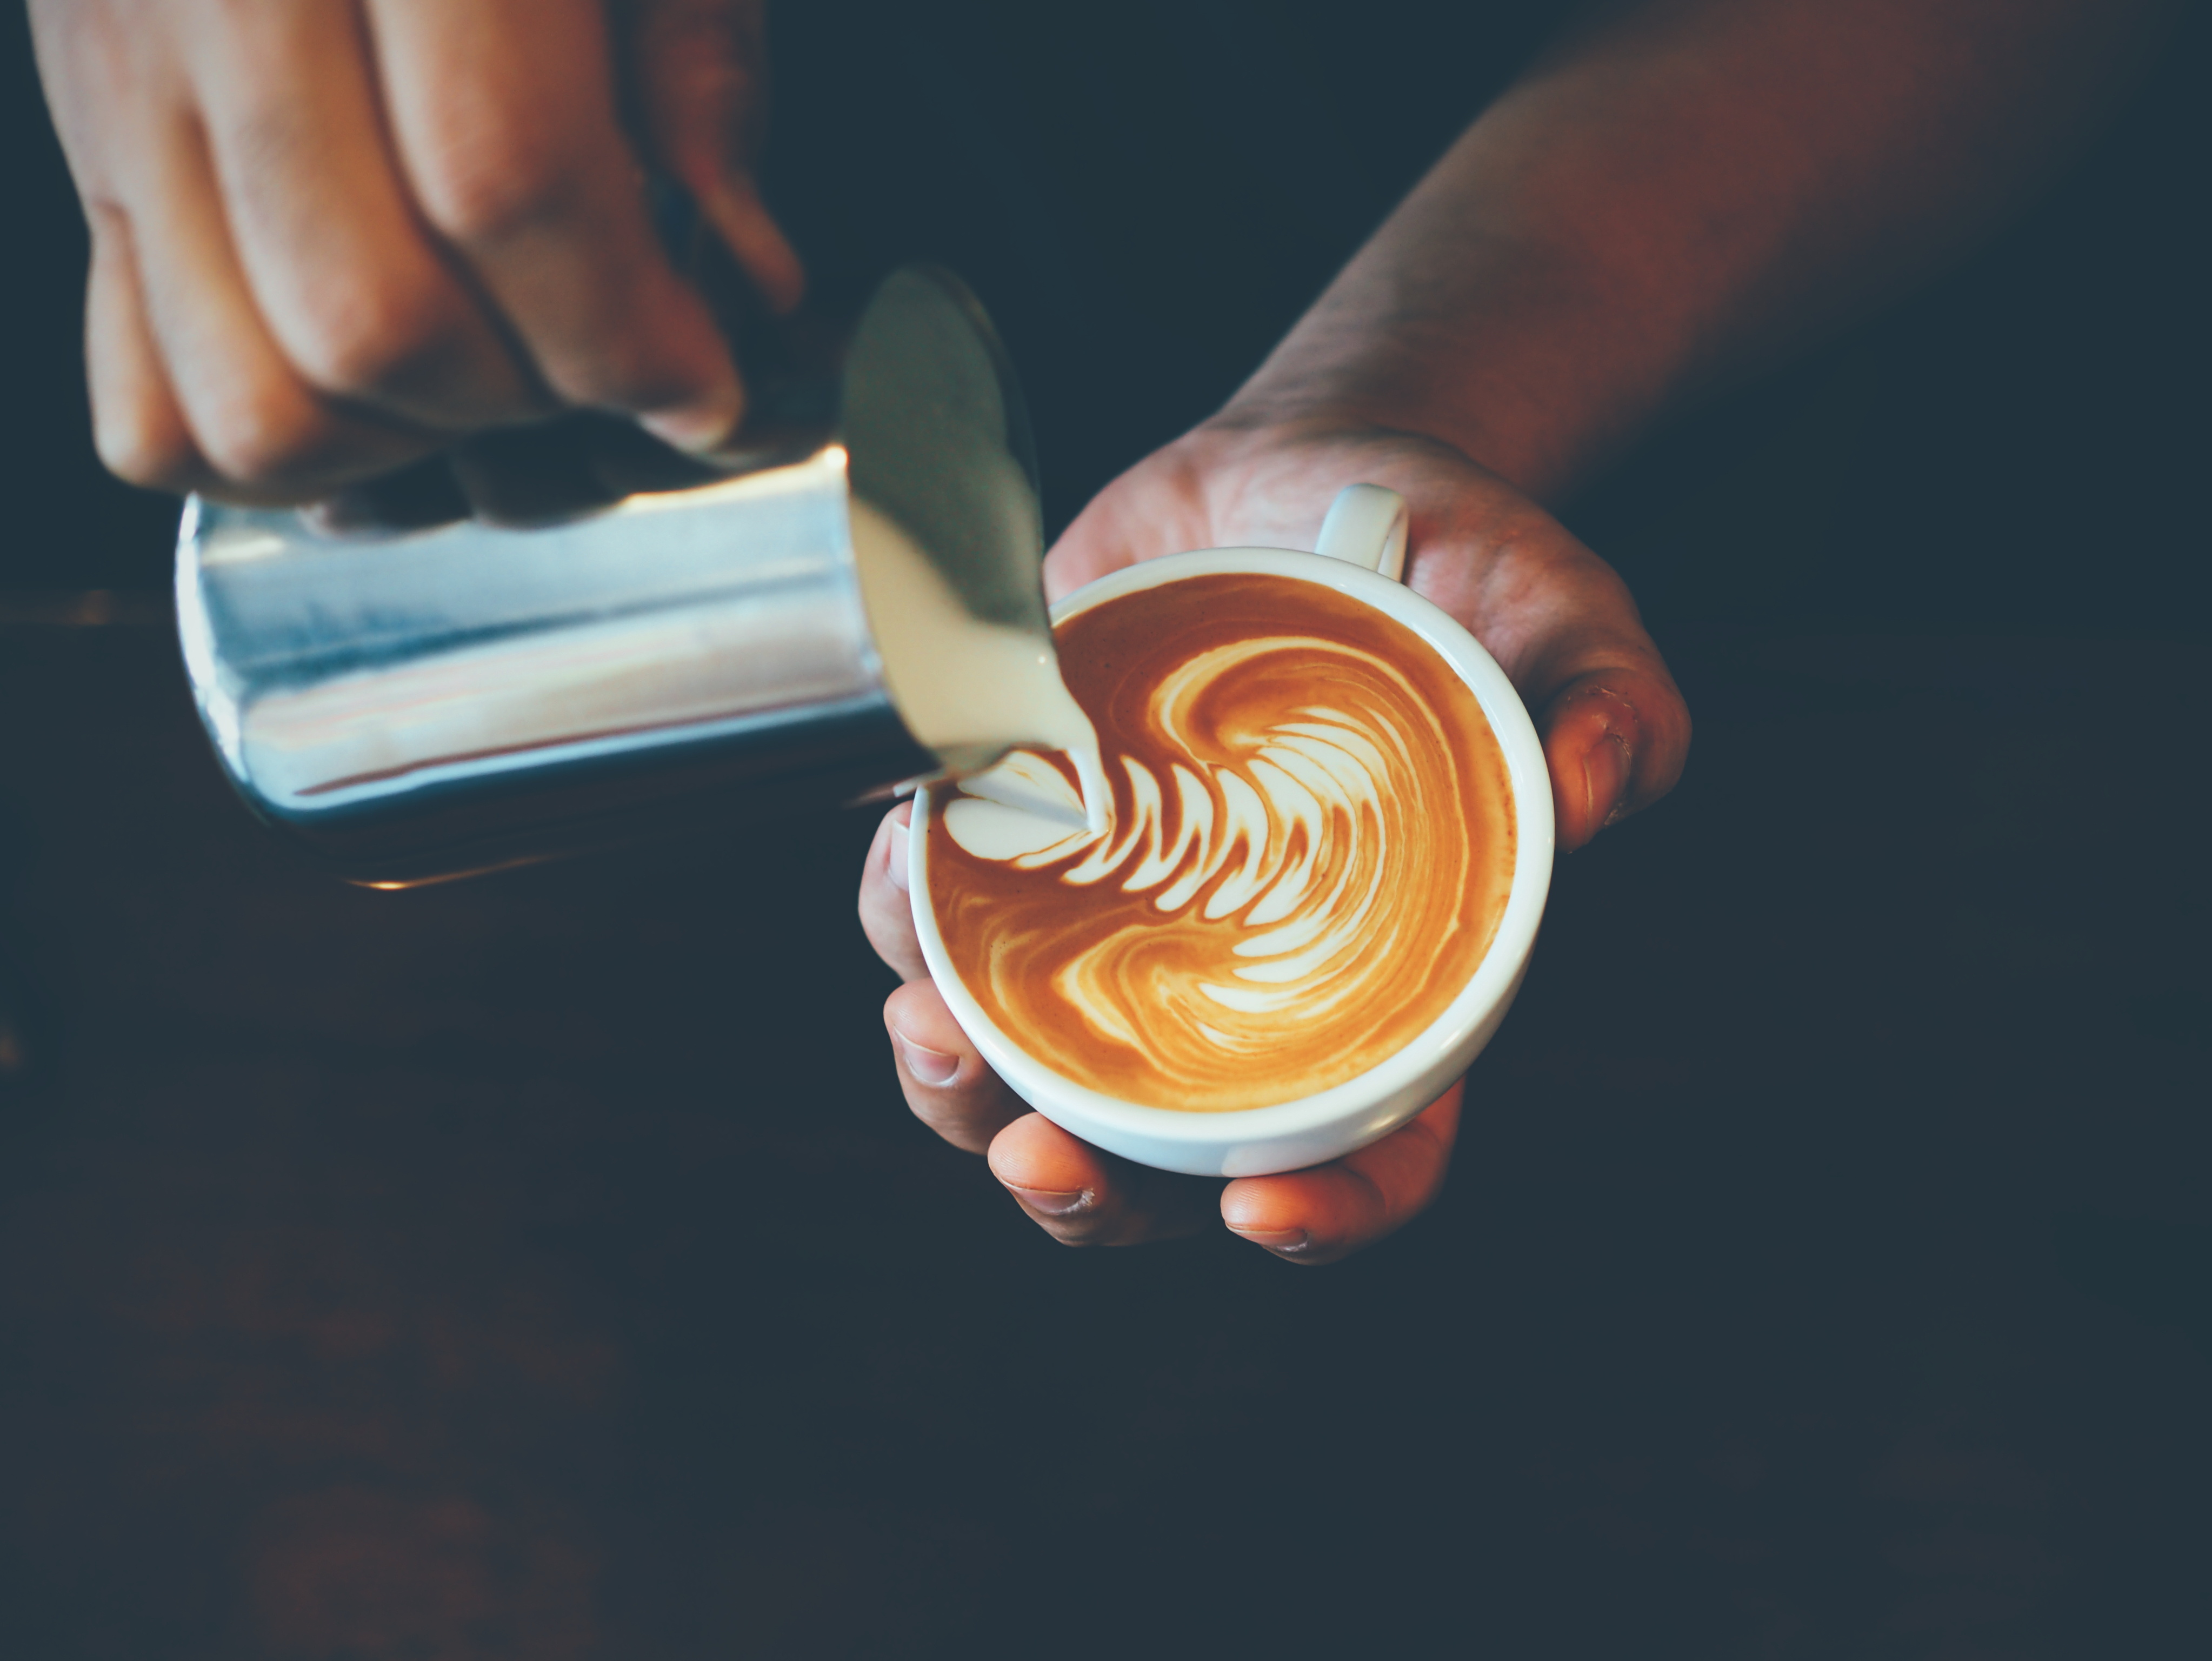 A close up photograph of a barista's hands pouring a latte.